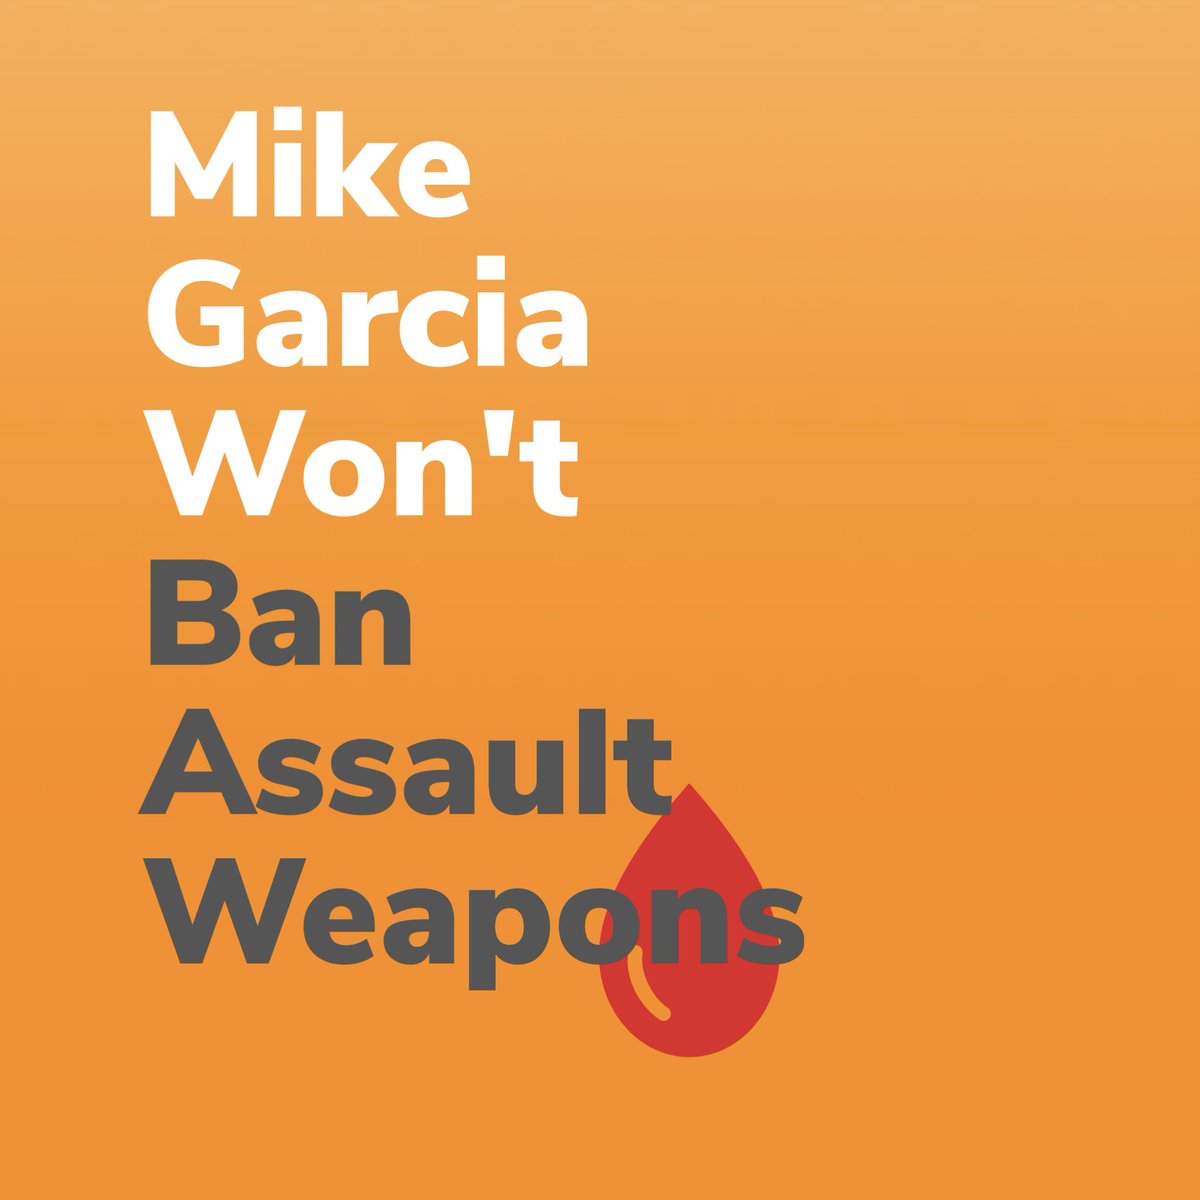 Even though the majority of Californians support assault weapons bans, these SoCal GOP members of Congress refuse to reinstate the nationwide assault weapons ban

Michelle Steel #CA45 
Ken Calvert #CA41
Young Kim #CA40
Mike Garcia #CA27 

#Uvalde #BanAssaultWeapons